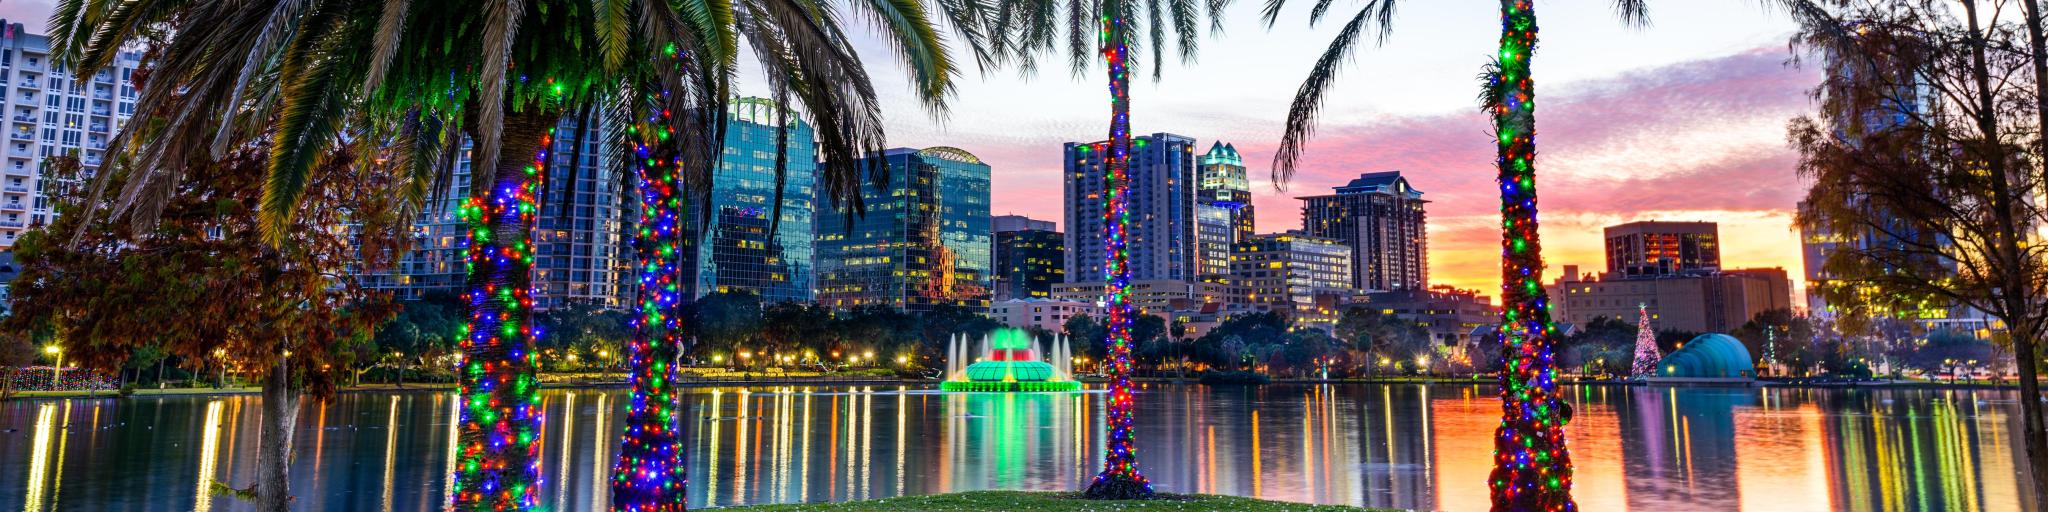 Orlando, Florida, USA downtown skyline at Eola Lake with colorful lights on the palm trees in the foreground.